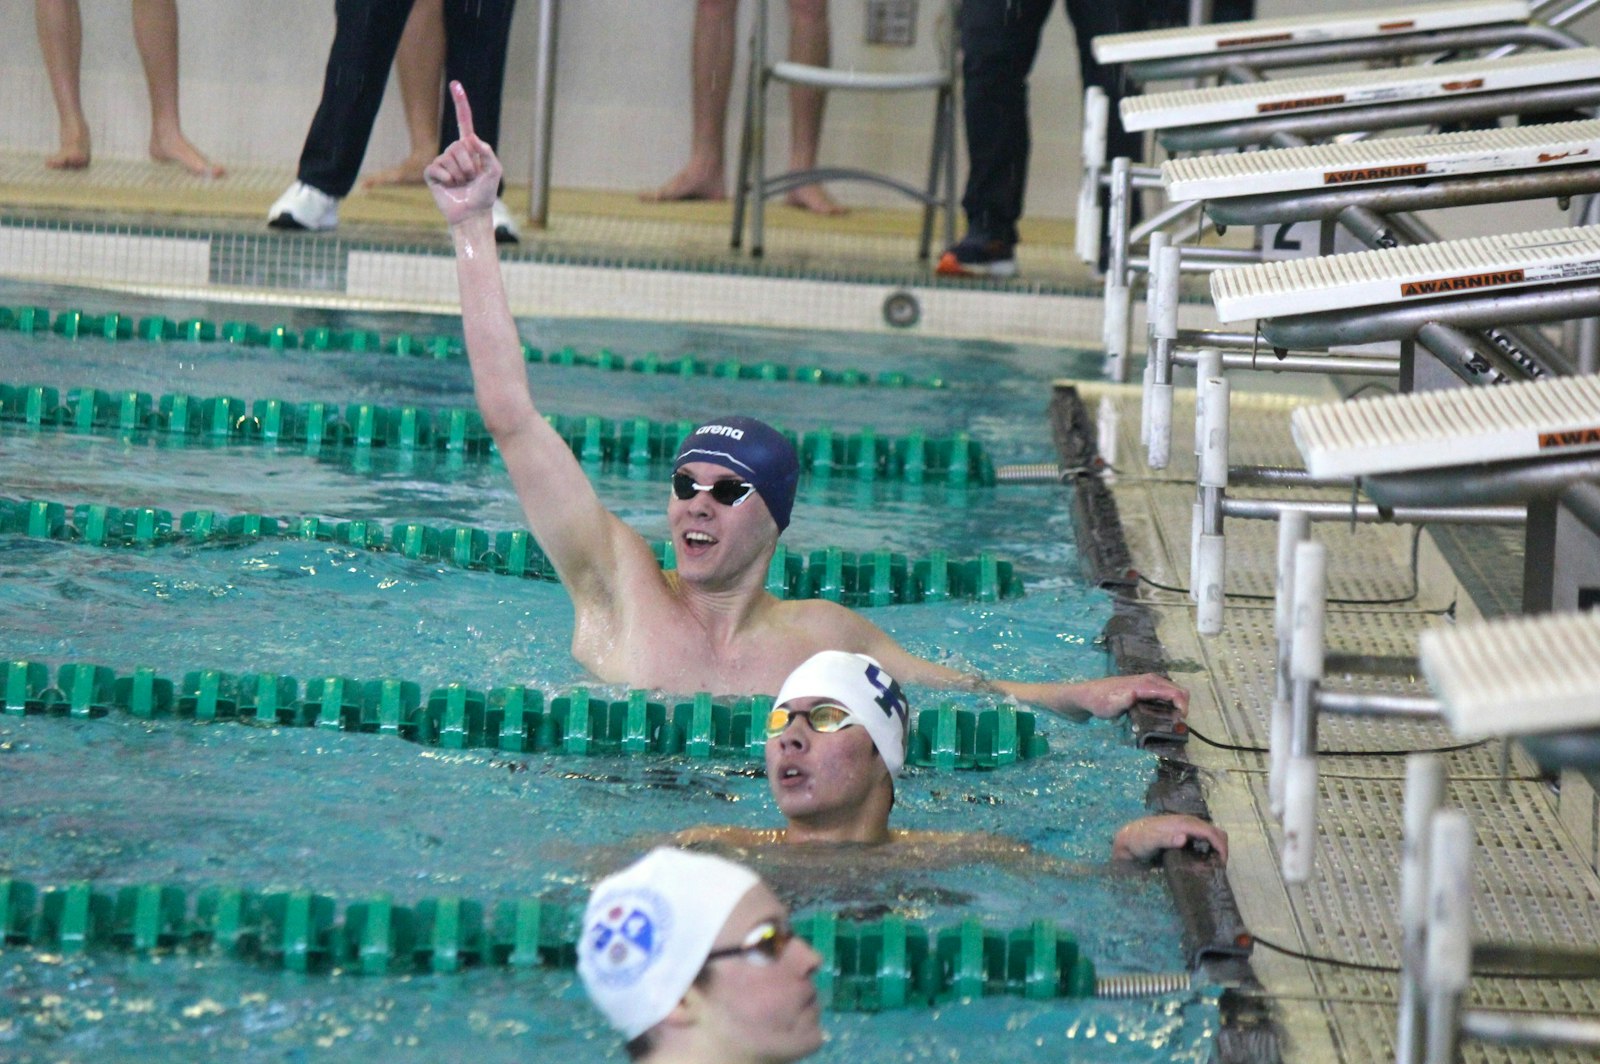 Calvin Meeker’s come-from-behind victory in the 500 freestyle propelled Cranbrook down the final stretch of the meet. He, Catholic Central’s Paddy Gerzema and teammate Sean Lu all finished within one second of each other in the long-distance race.